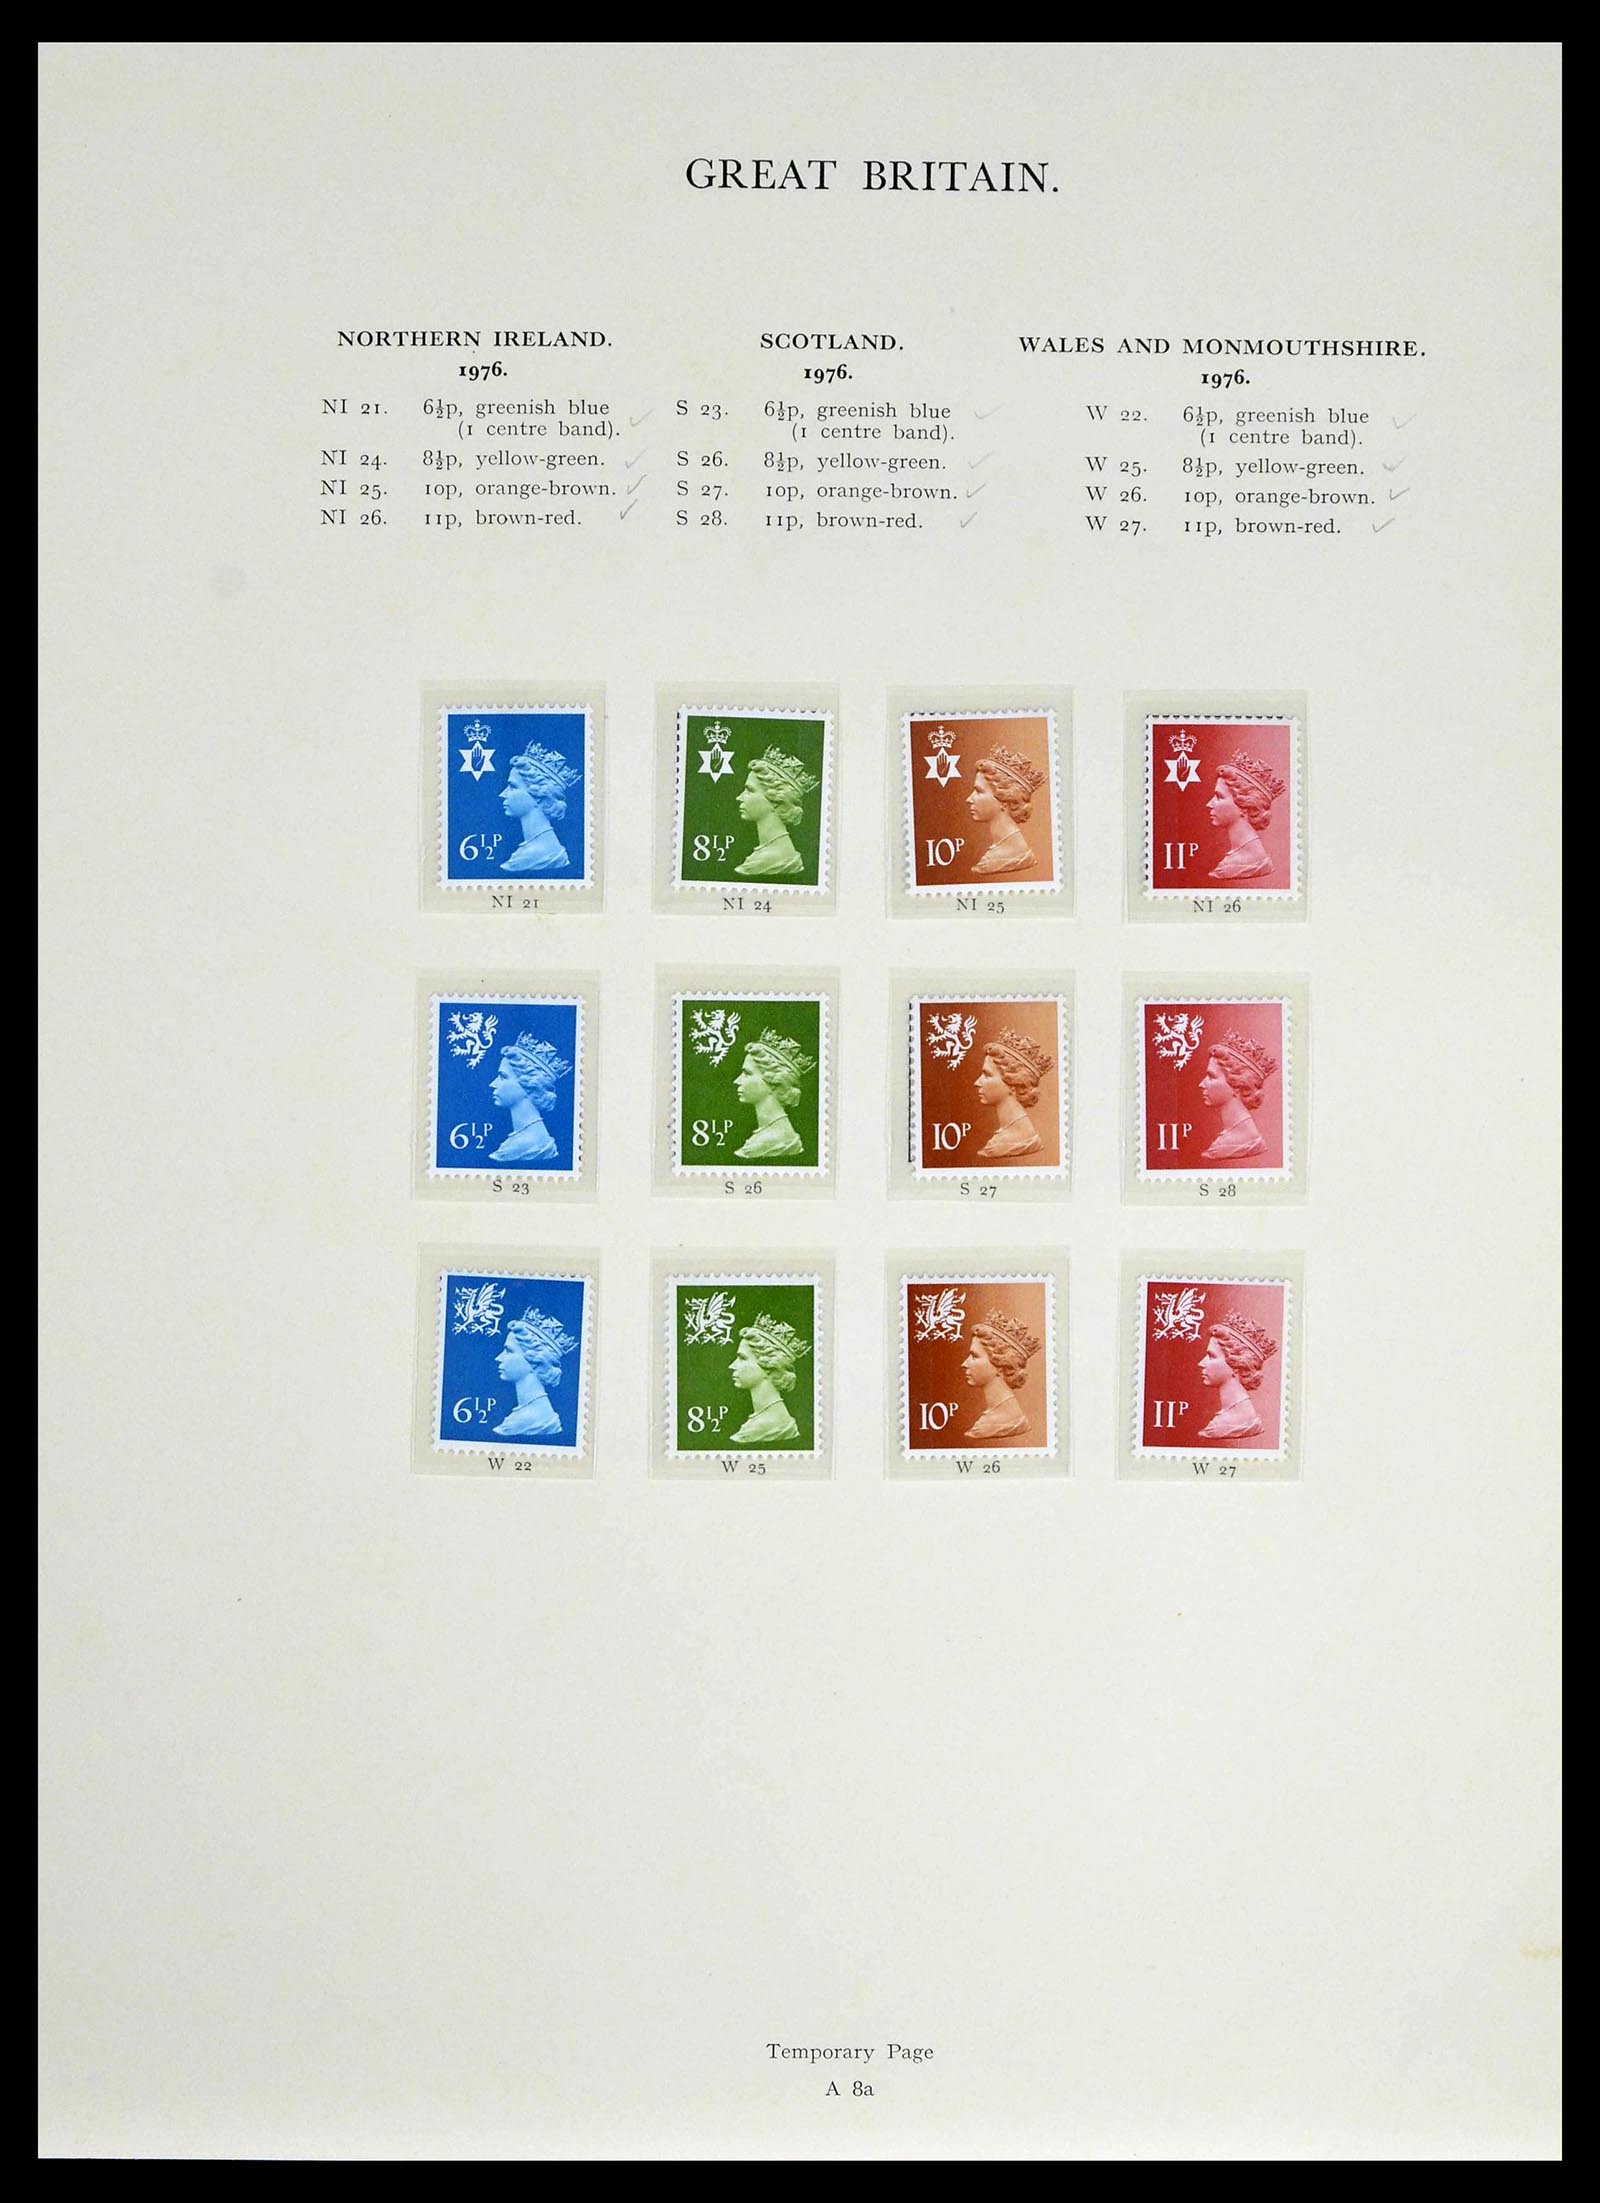 39025 0148 - Stamp collection 39025 Great Britain specialised 1840-1990.